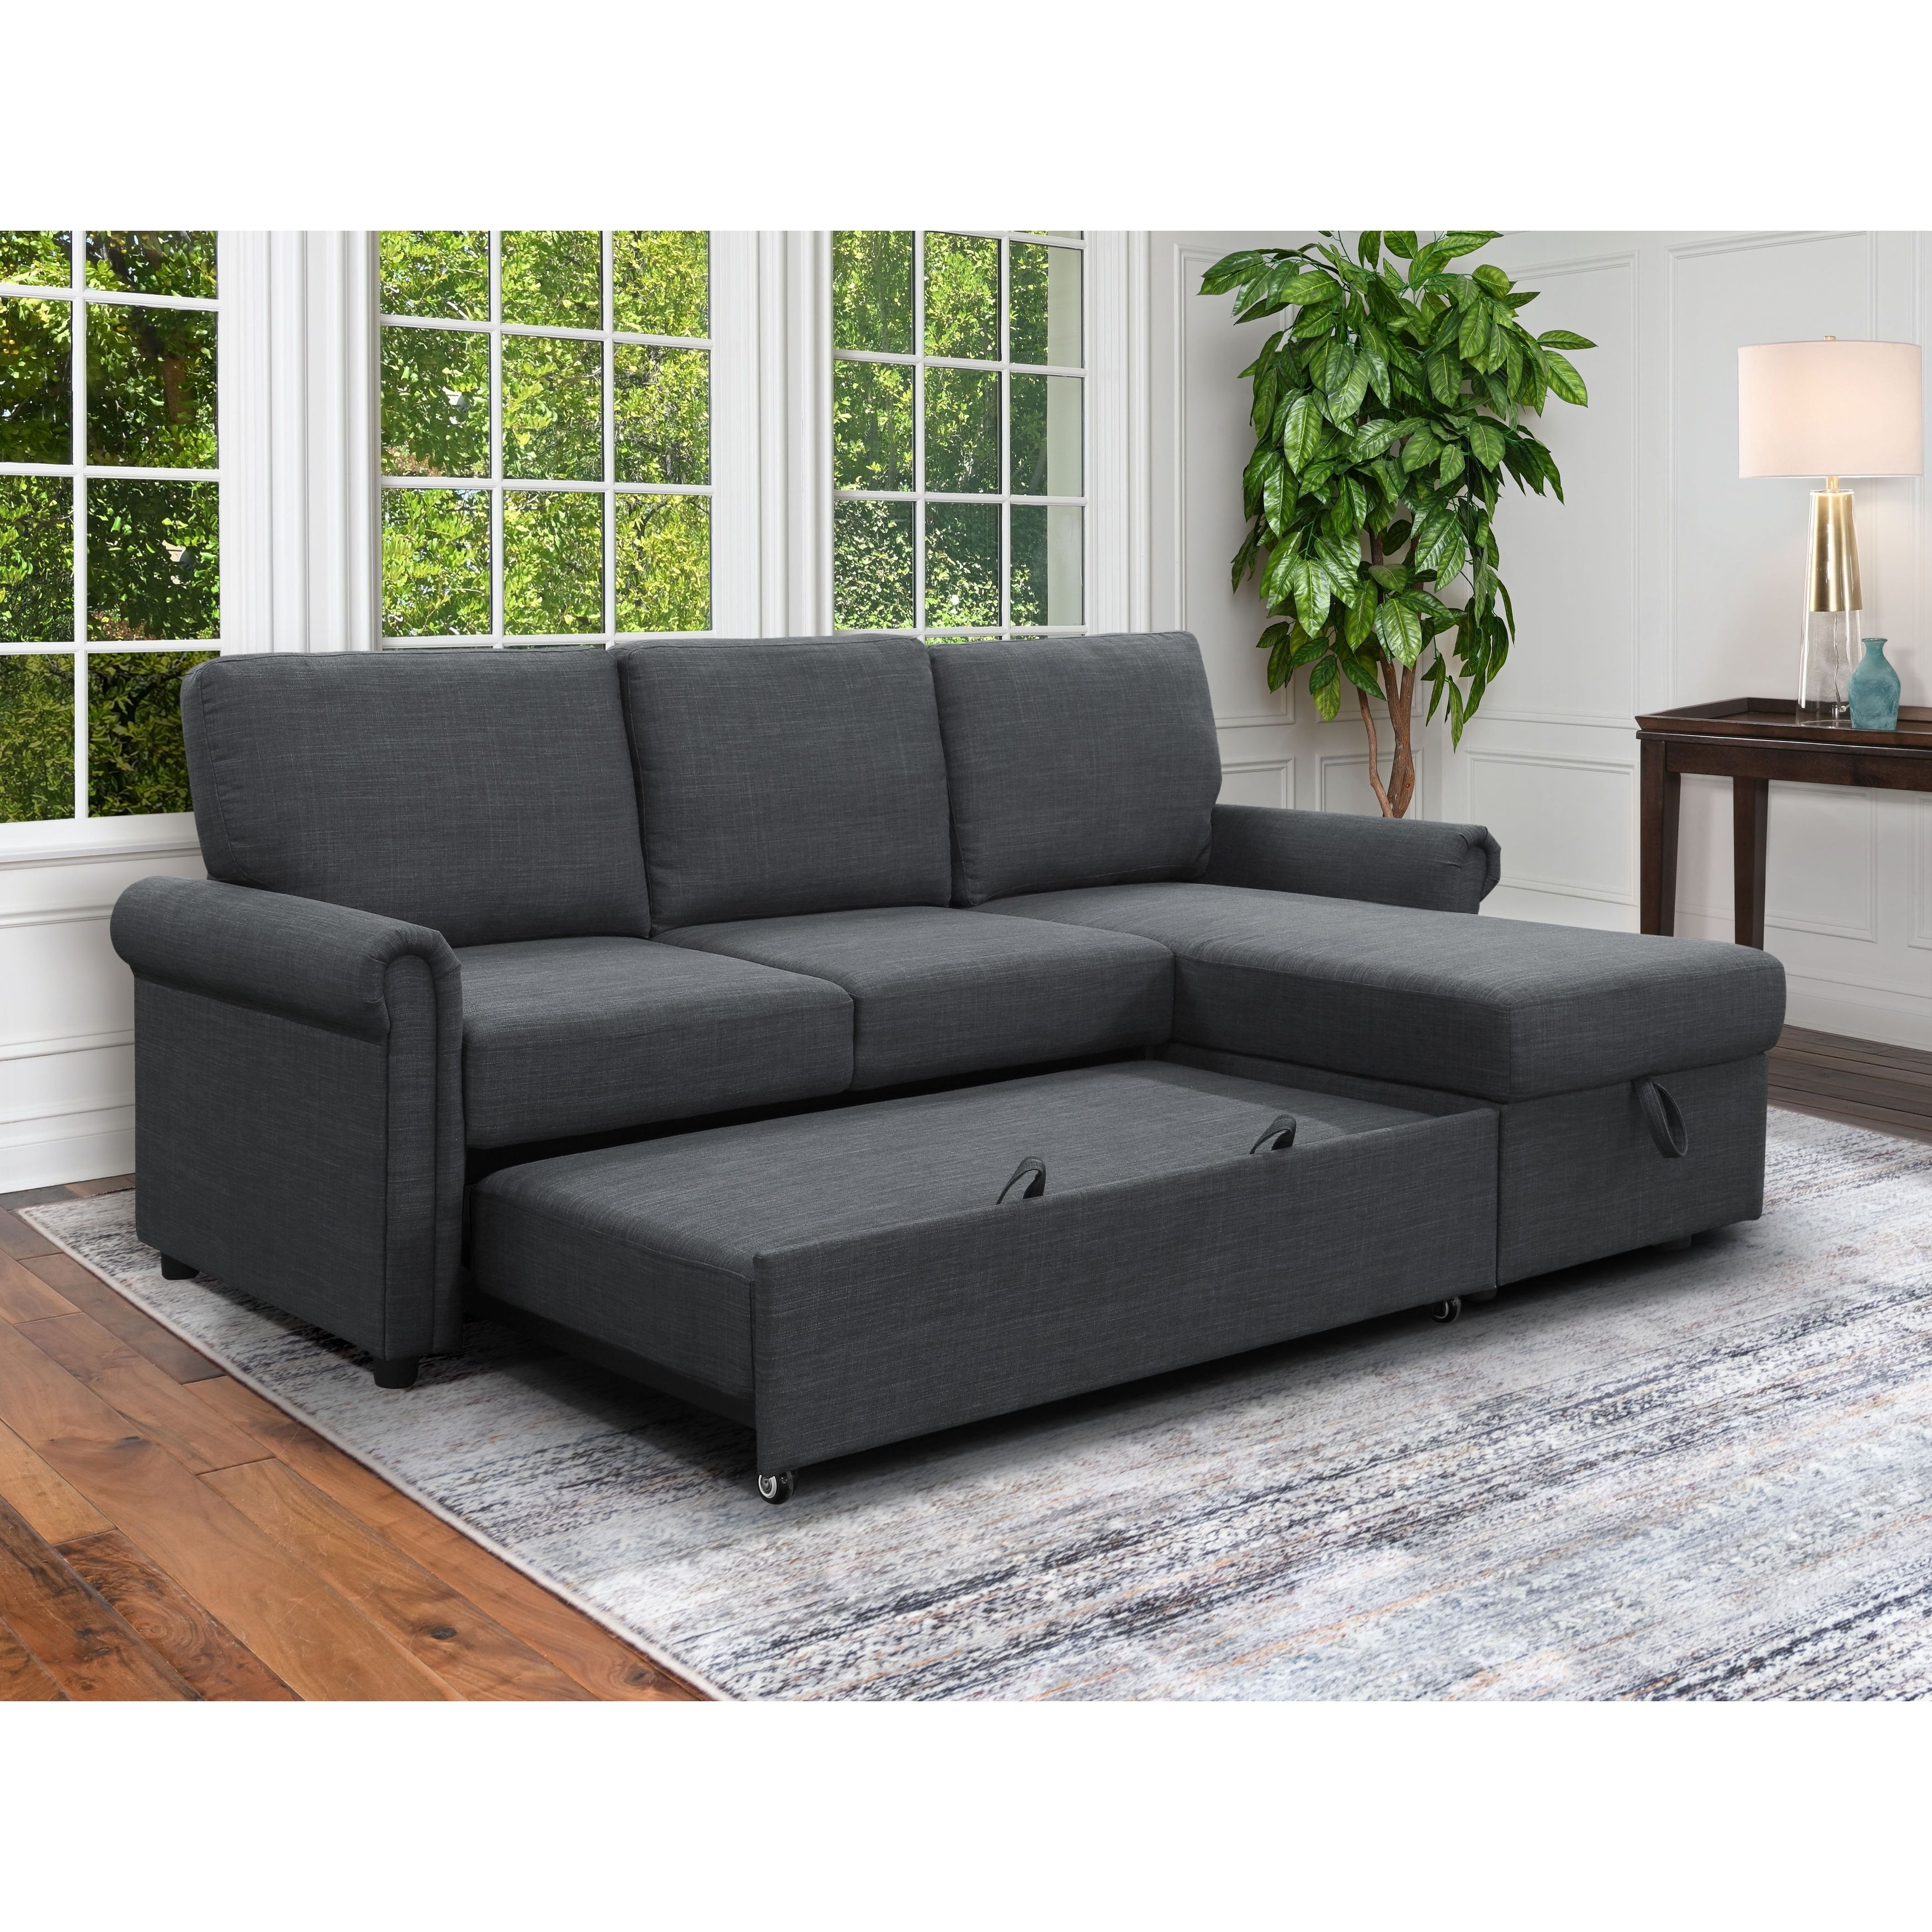 Abbyson Hamilton Reversible Fabric Sleeper Sectional With Storage – On Sale  – – 31997945 Within Sofa Sectionals With Storage (View 7 of 20)